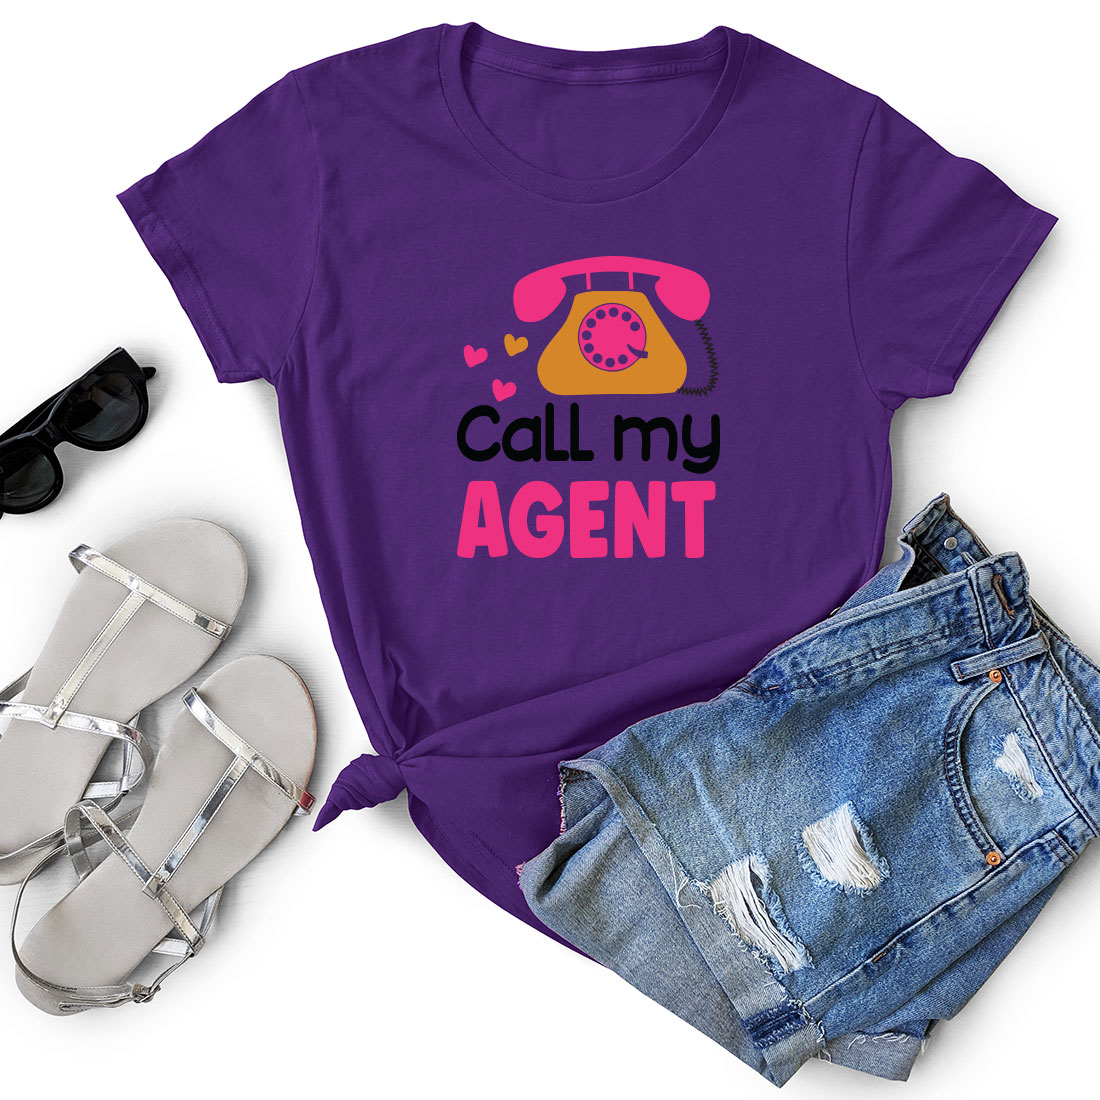 Purple t - shirt that says call my agent next to a pair of shorts.